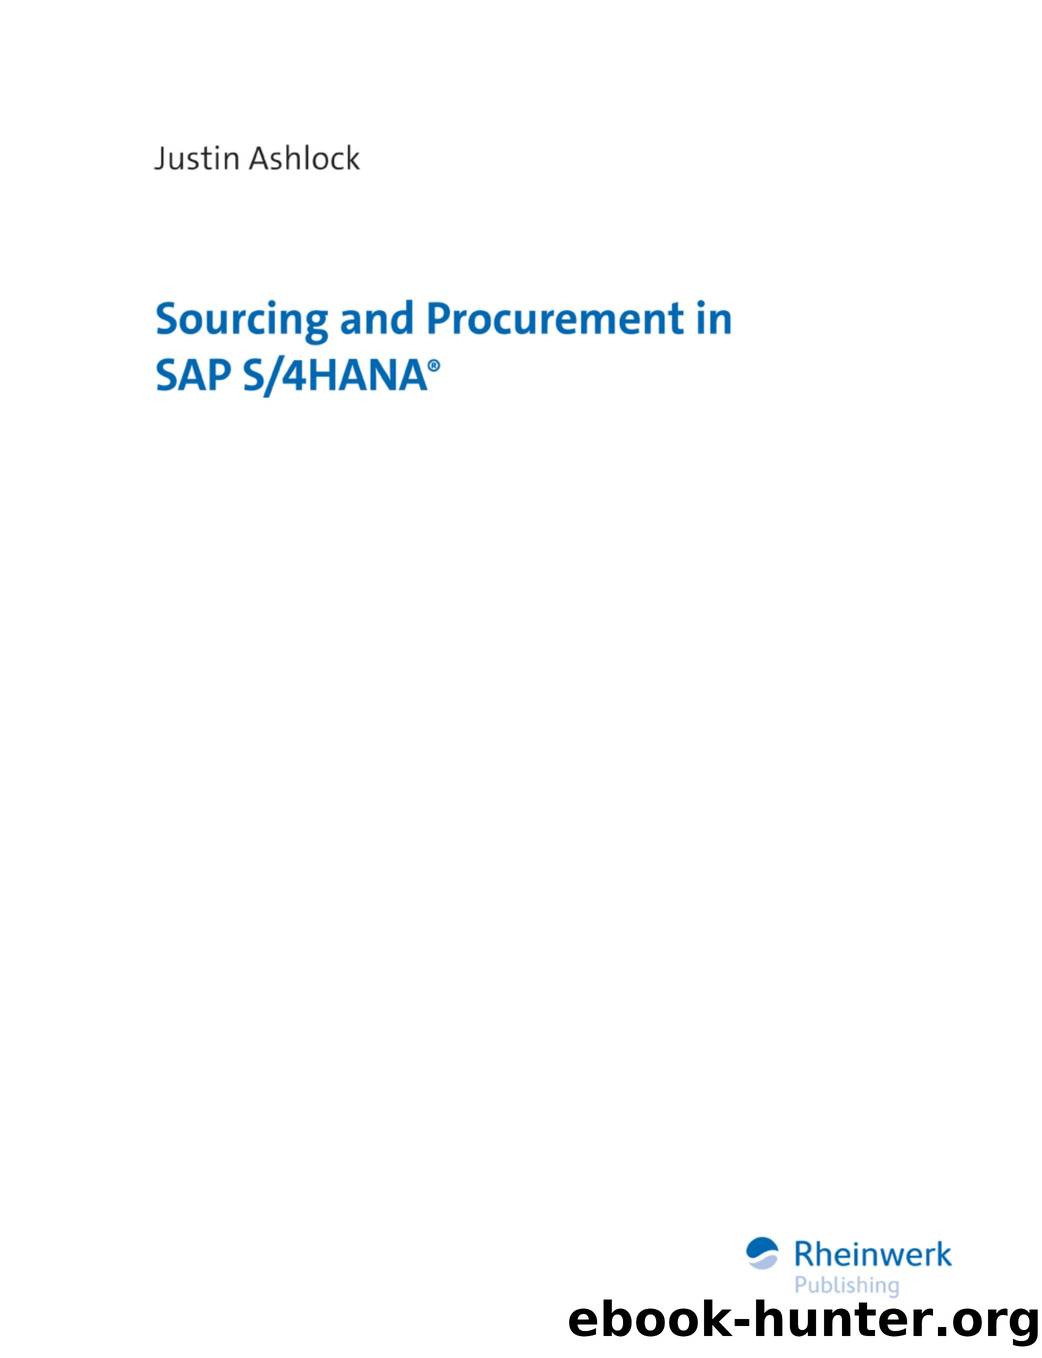 Sourcing and Procurement in SAP S4HANA by Unknown